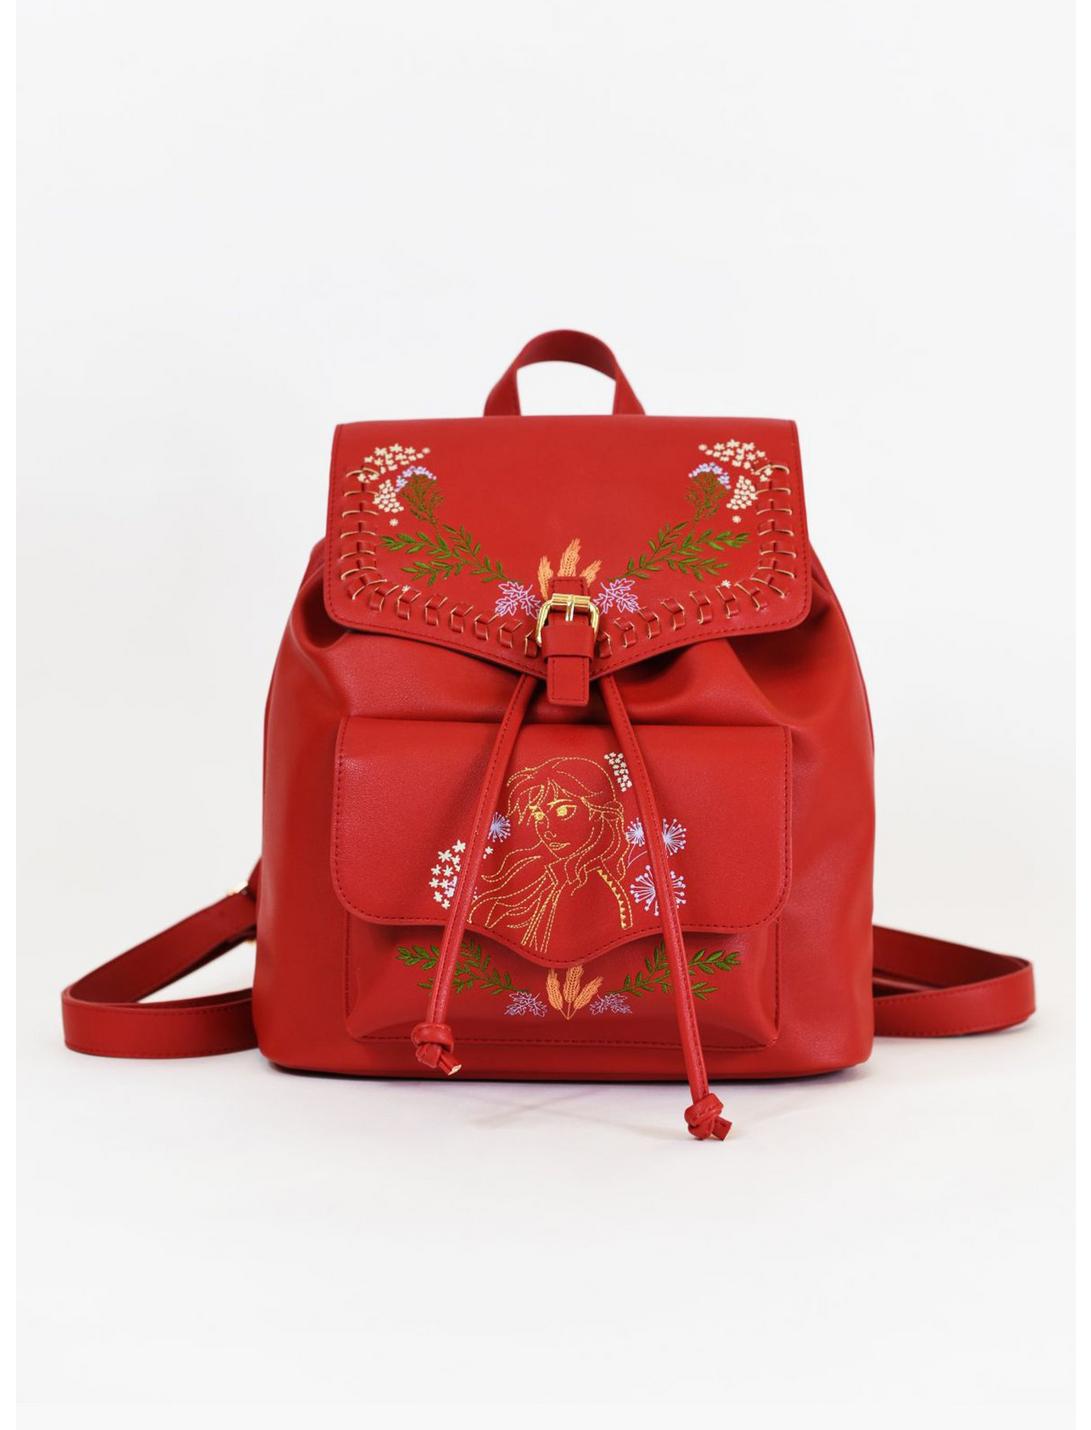 Danielle Nicole Disney Frozen 2 Anna Nature Backpack Red , , hi-res